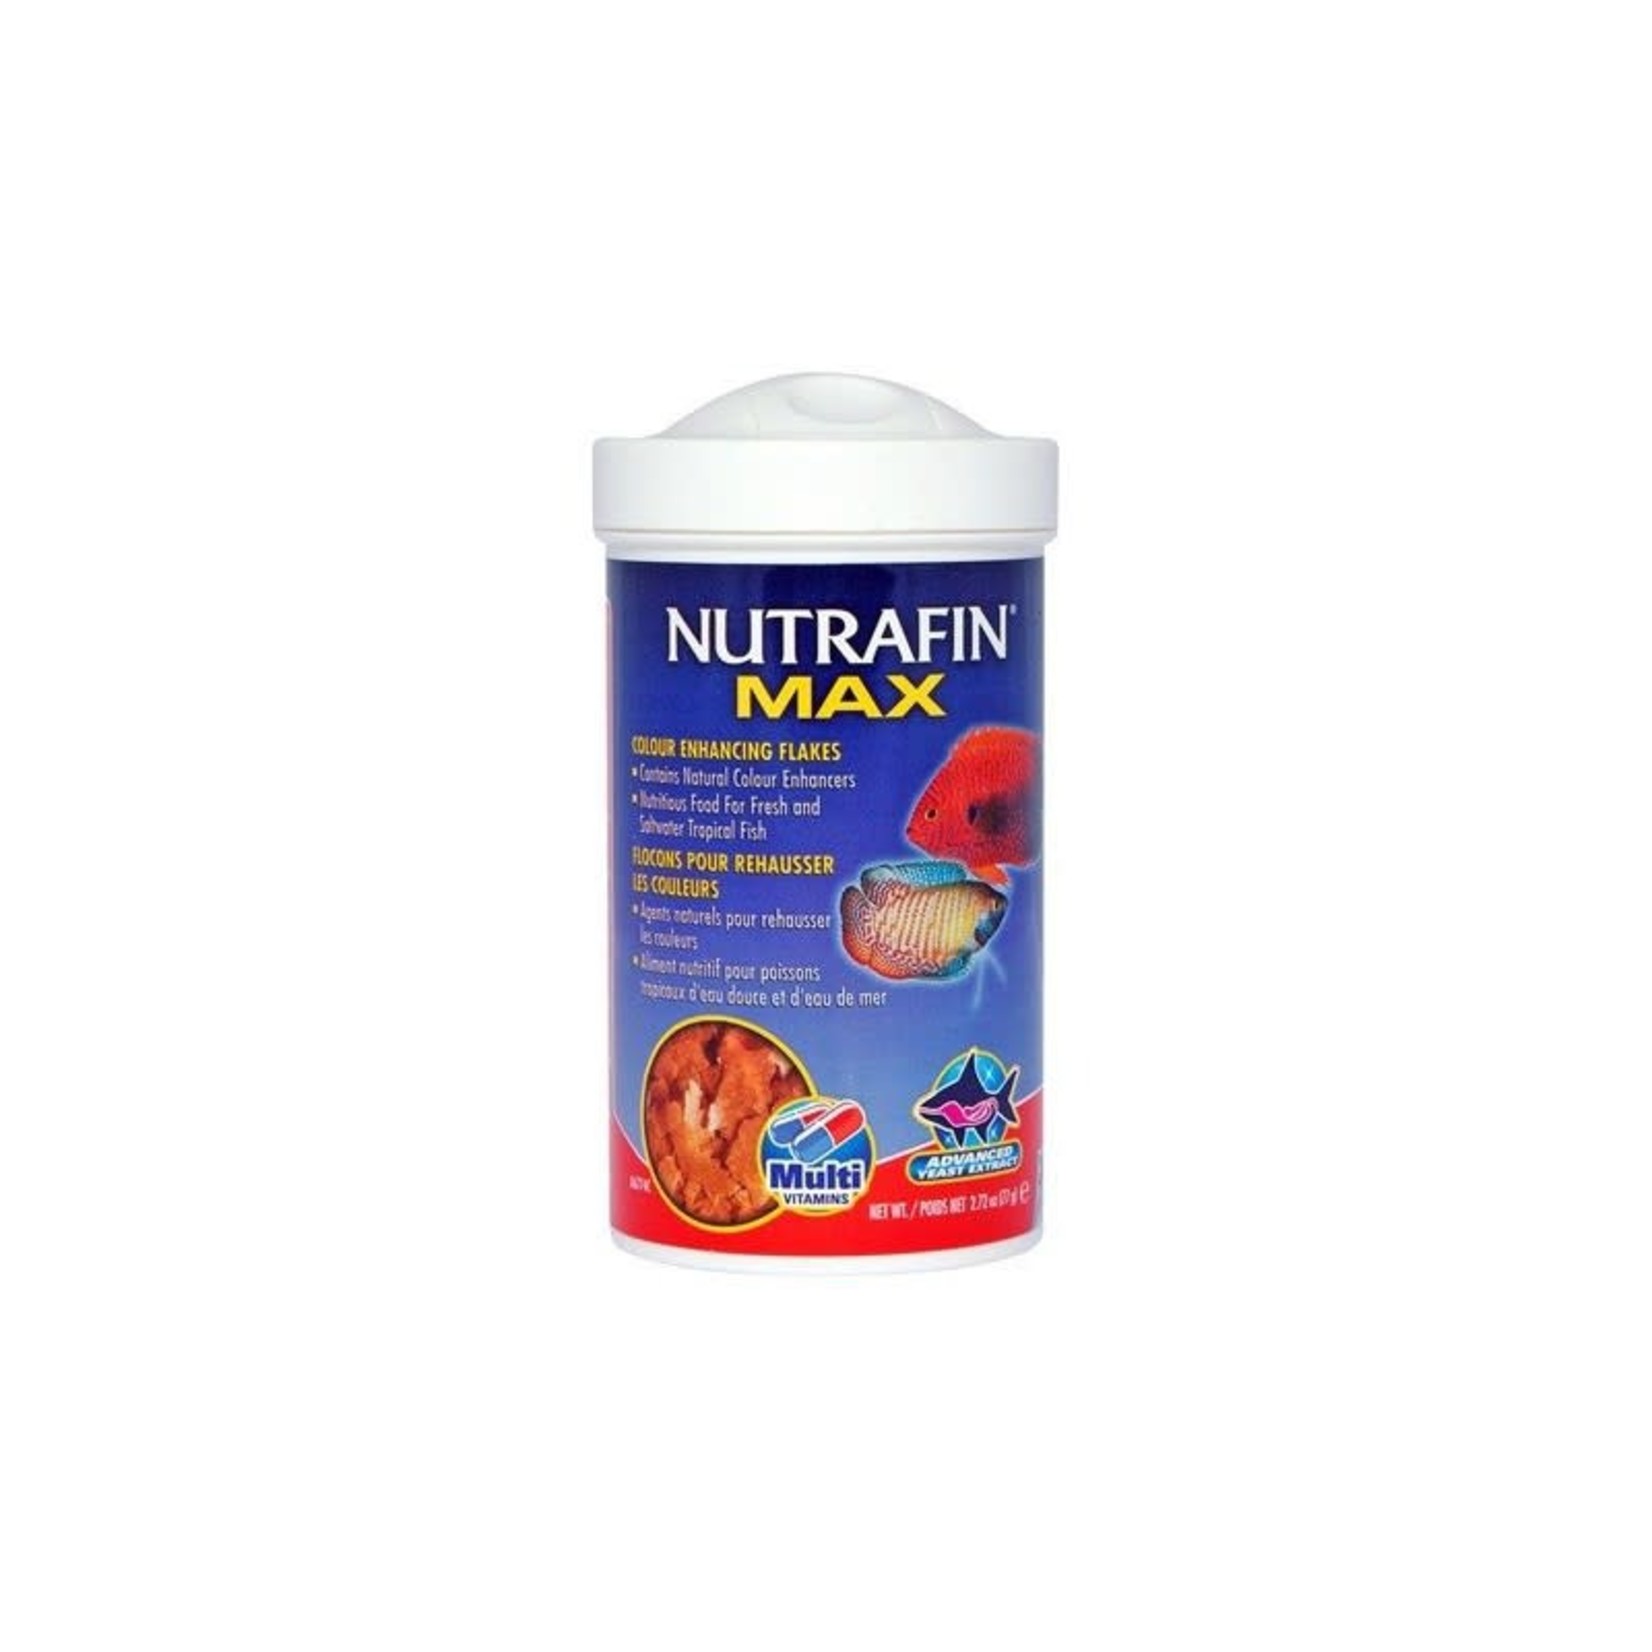 Nutrafin Nutrafin Max Color Flakes 2.72 oz